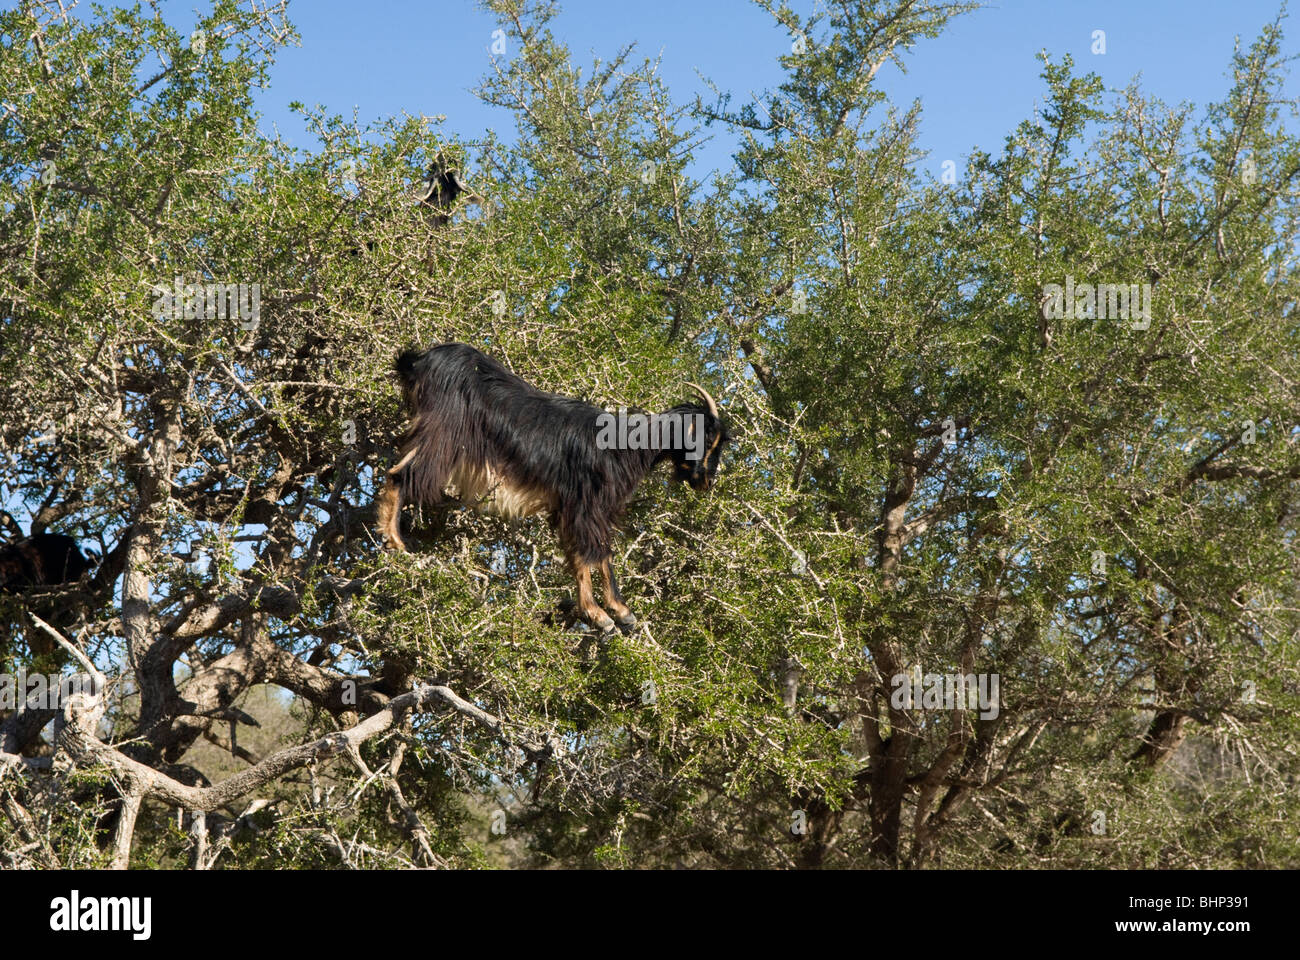 Goats standing in an Argan tree (Argania spinosa) to feed on the leaves and fruit. Marrakech-Tensift-El Haouz region, Morocco. Stock Photo